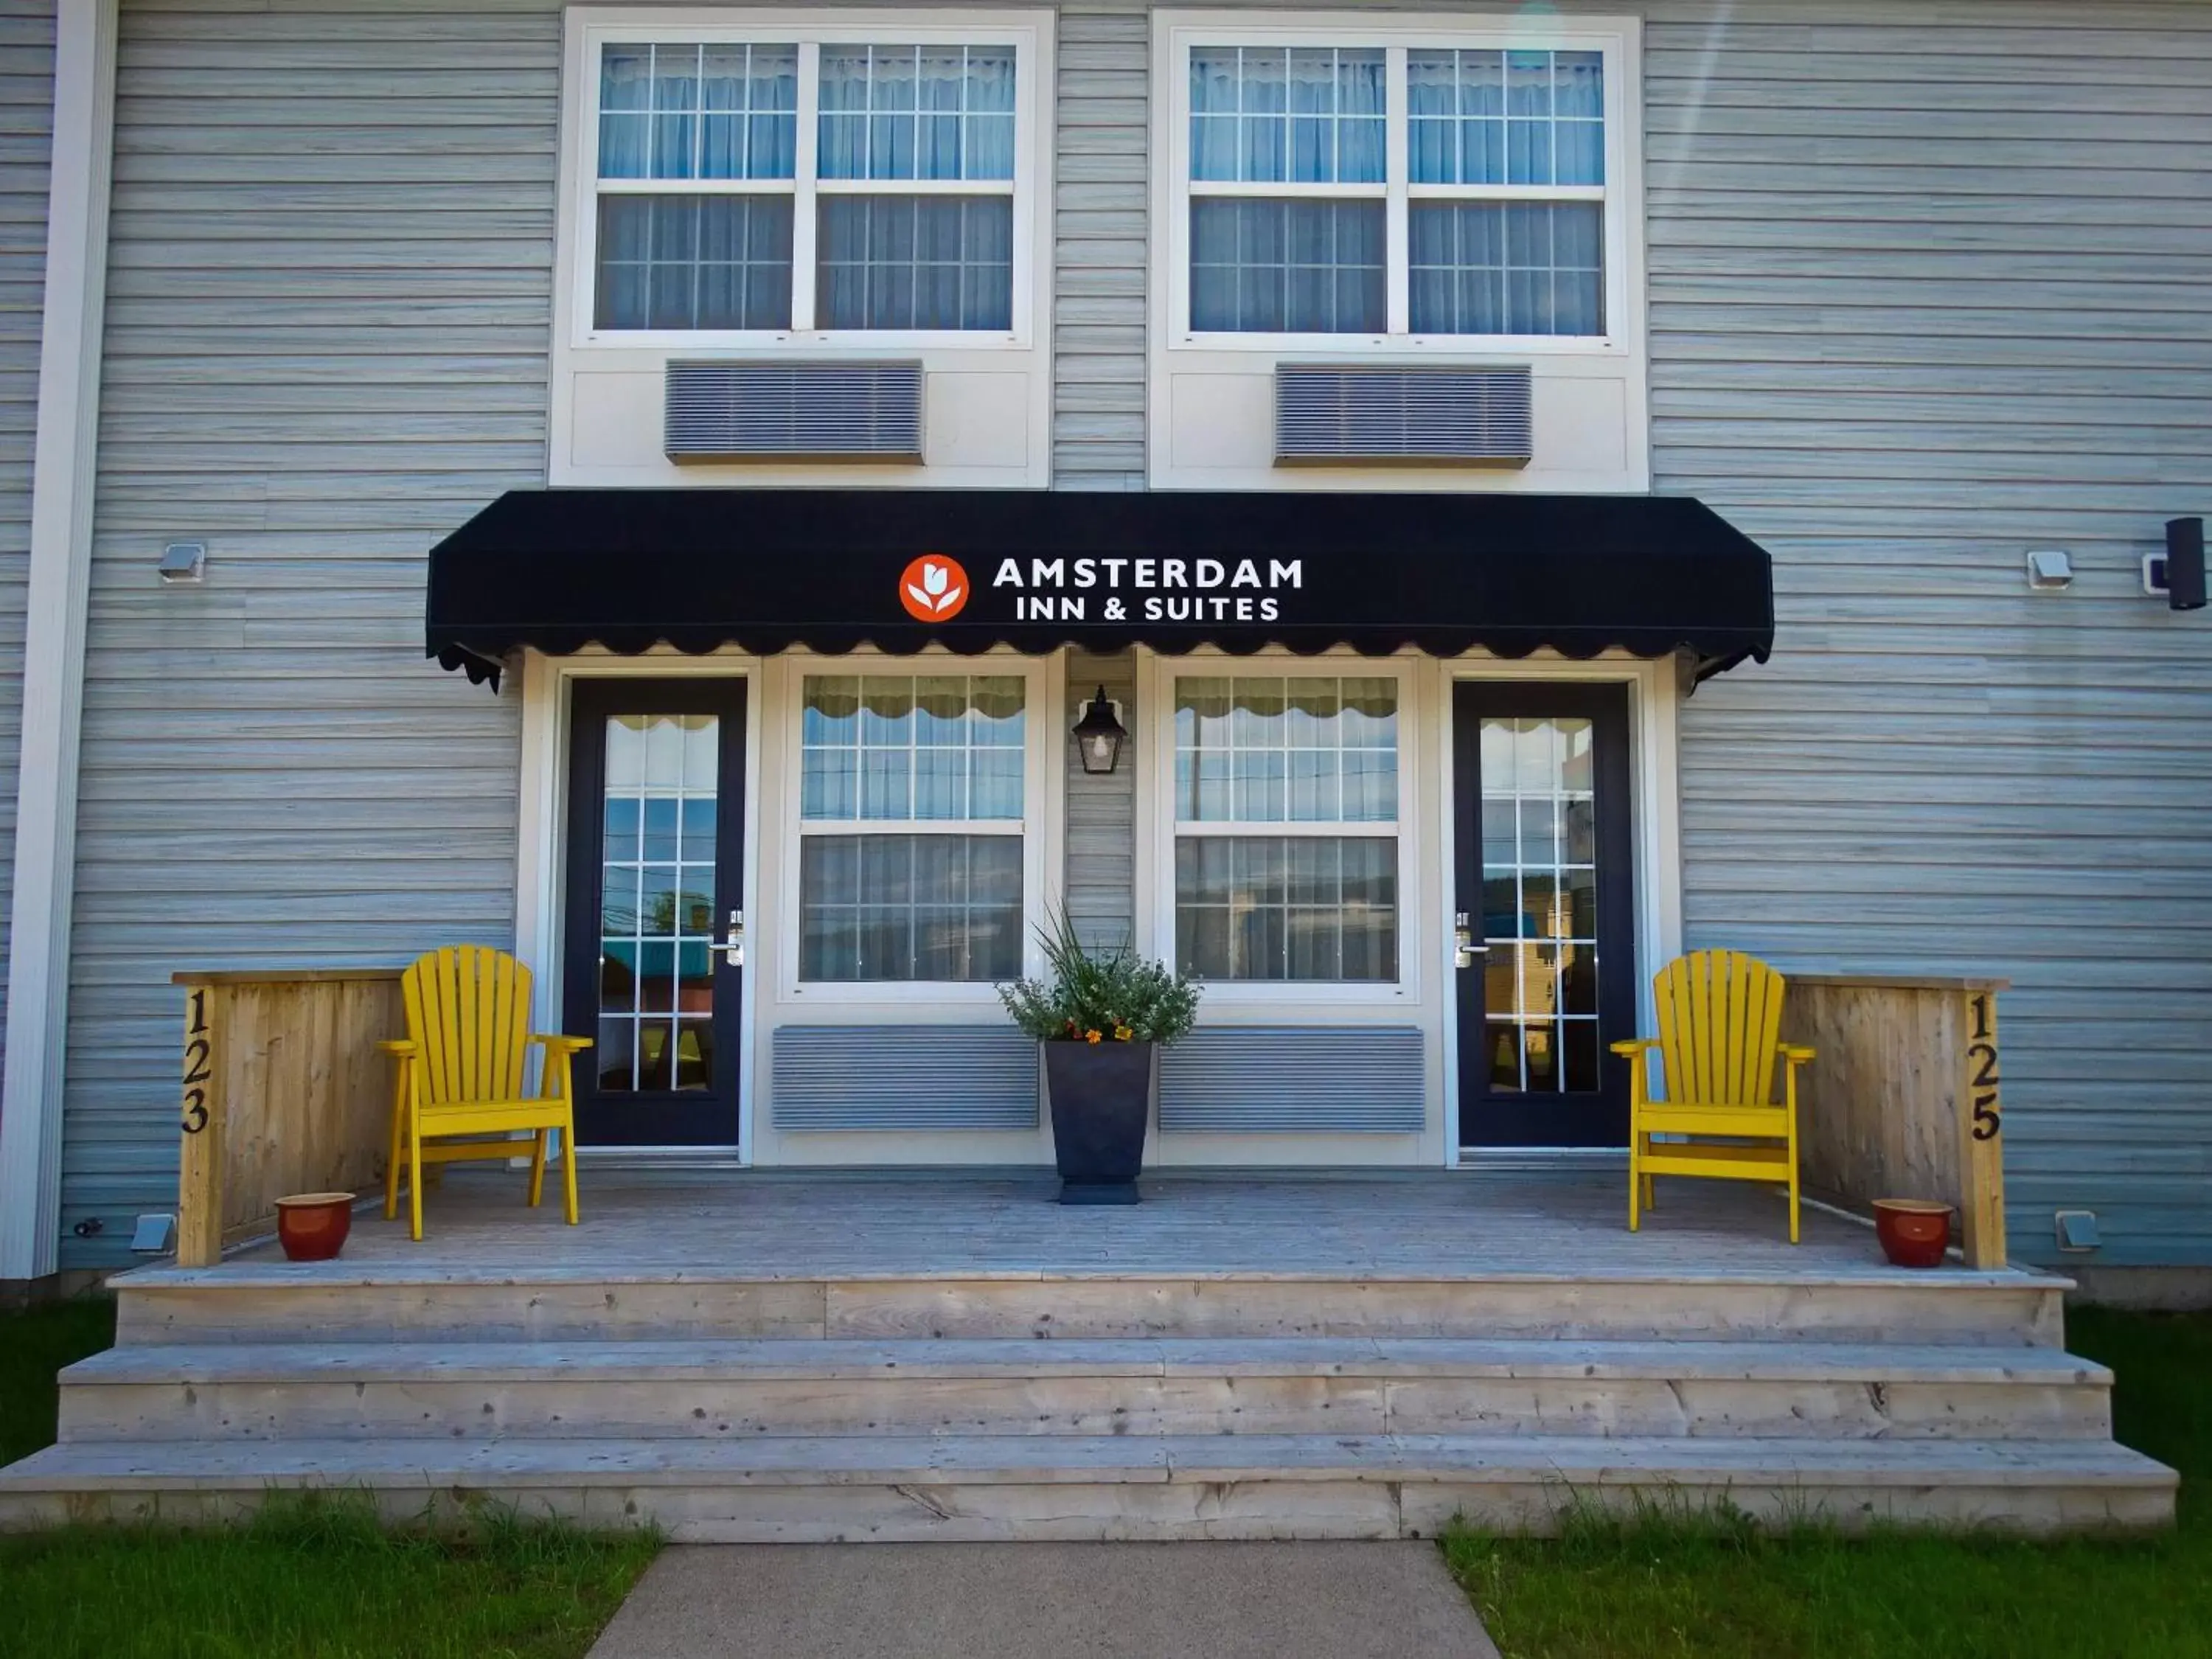 Property building in Amsterdam Inn & Suites Moncton